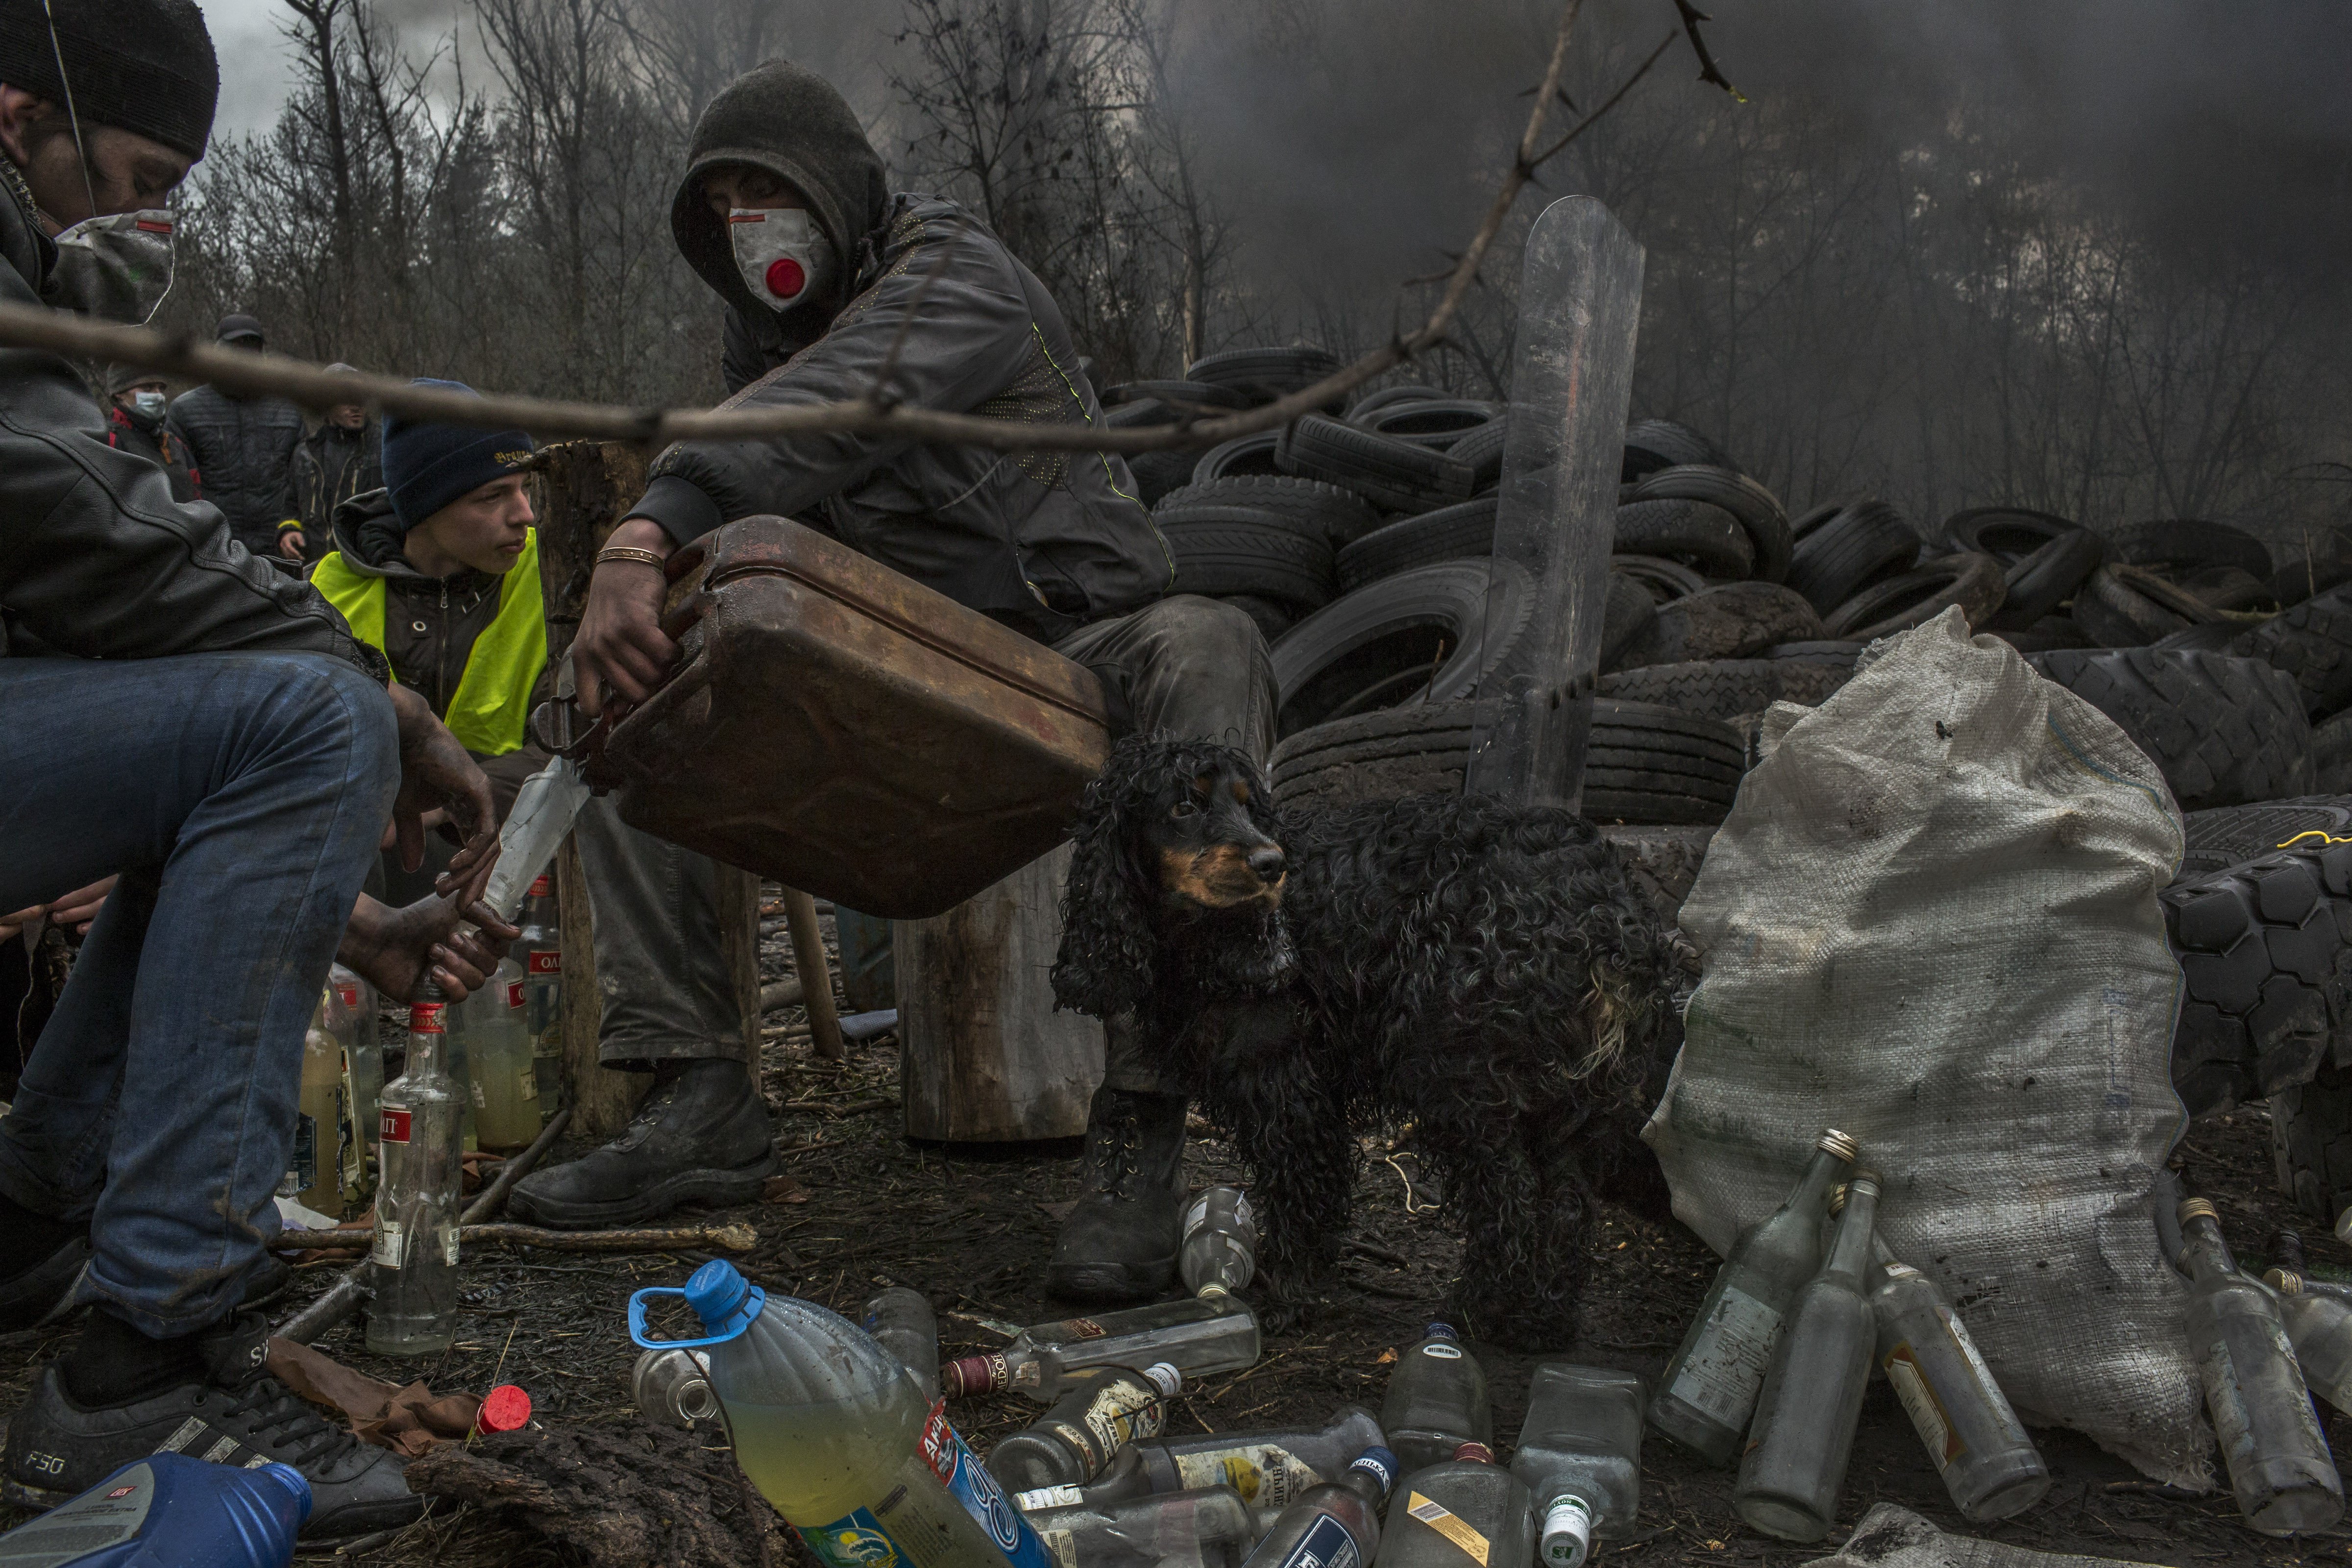 Apr. 13, 2014. Pro-Russian protesters prepare Molotov cocktails next to a barricade at one of the entrances to Slovyansk, Ukraine. A Ukrainian official said special forces on Sunday evicted gunmen from the Slovyansk Police Headquarters, but local residents and men at barricades denied that Ukrainian forces had even entered the town.